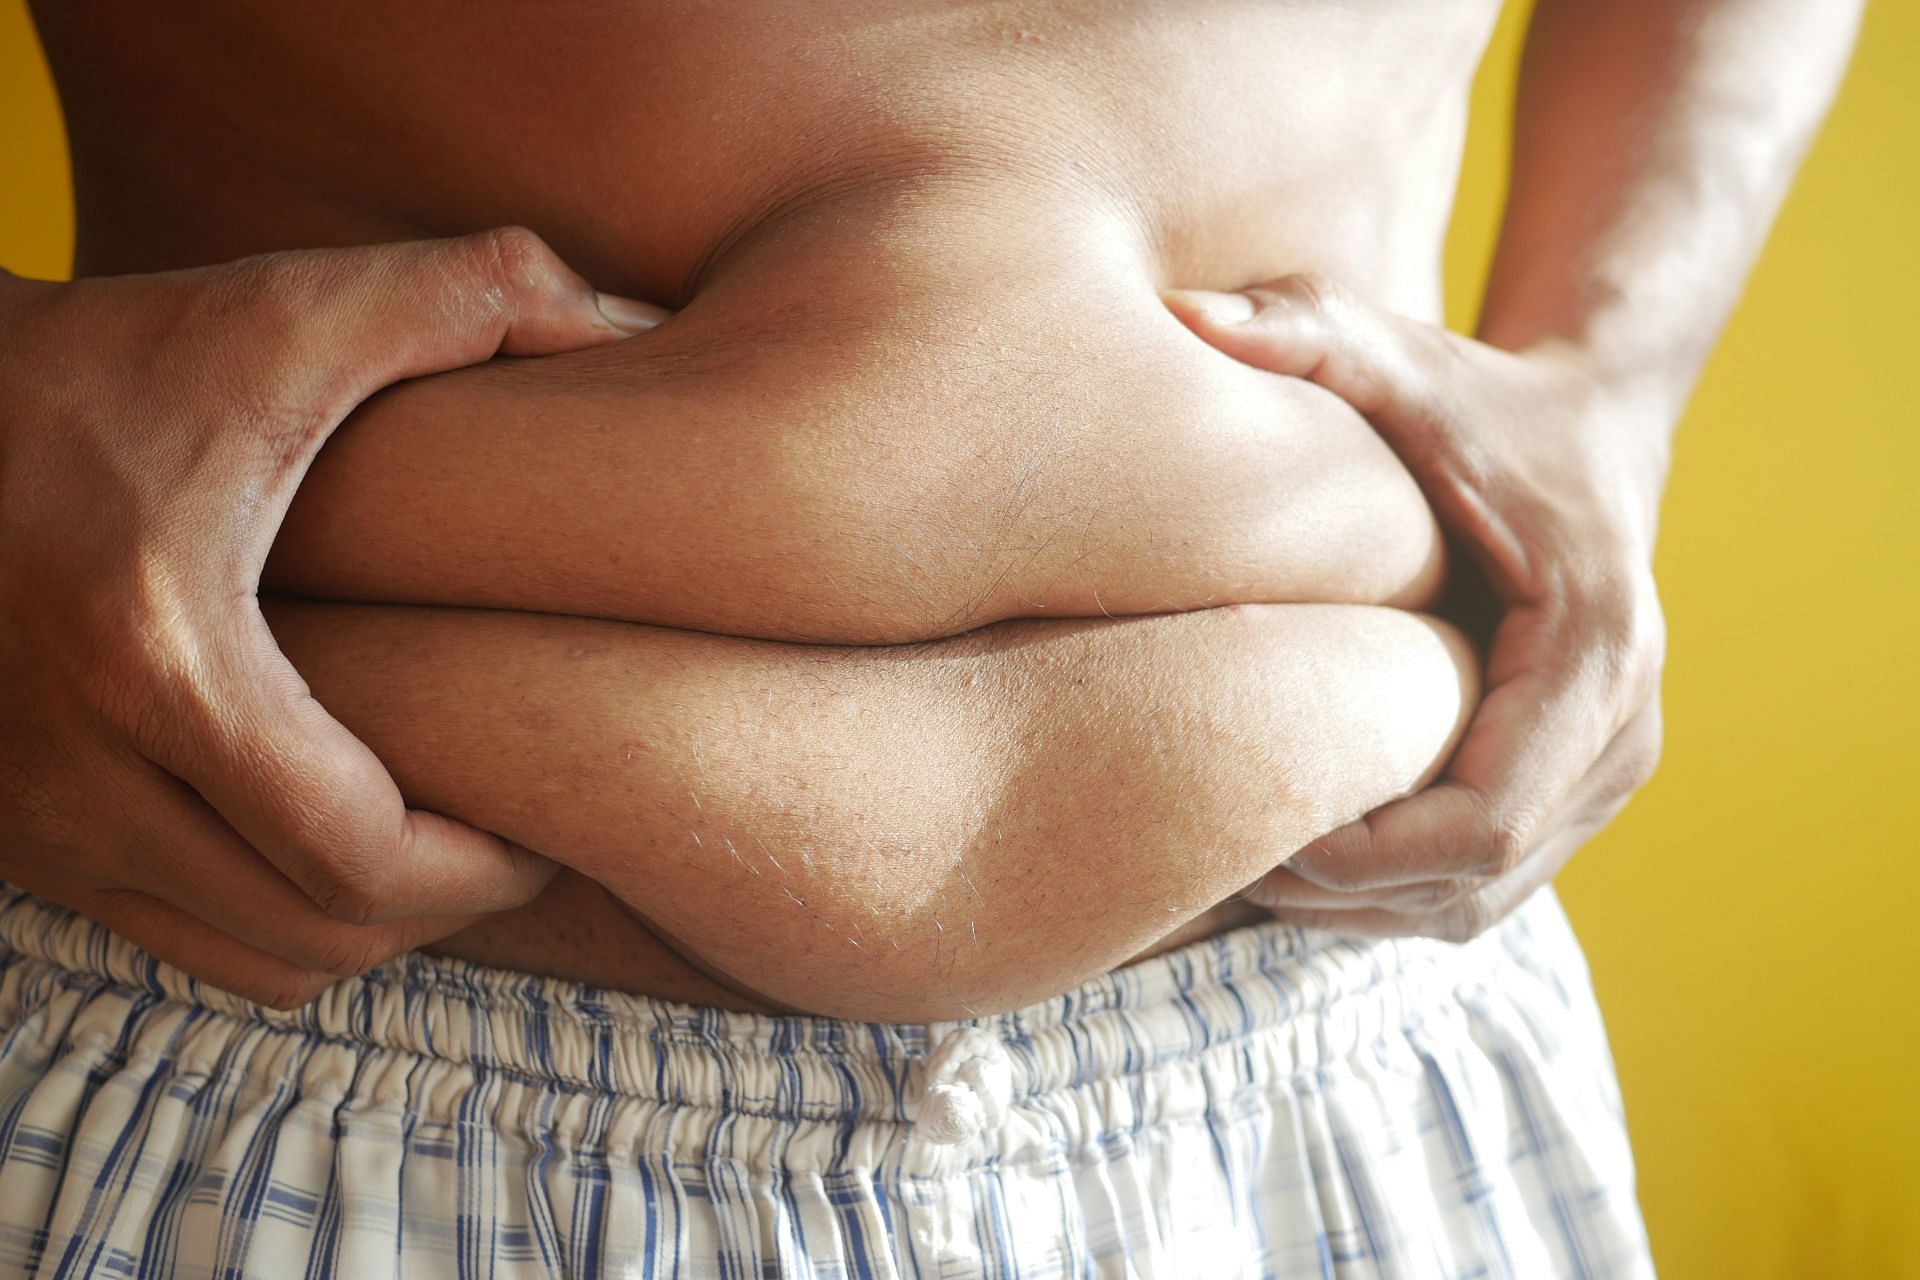 Importance of losing weight (image sourced via Pexels / Photo by towfiqu)